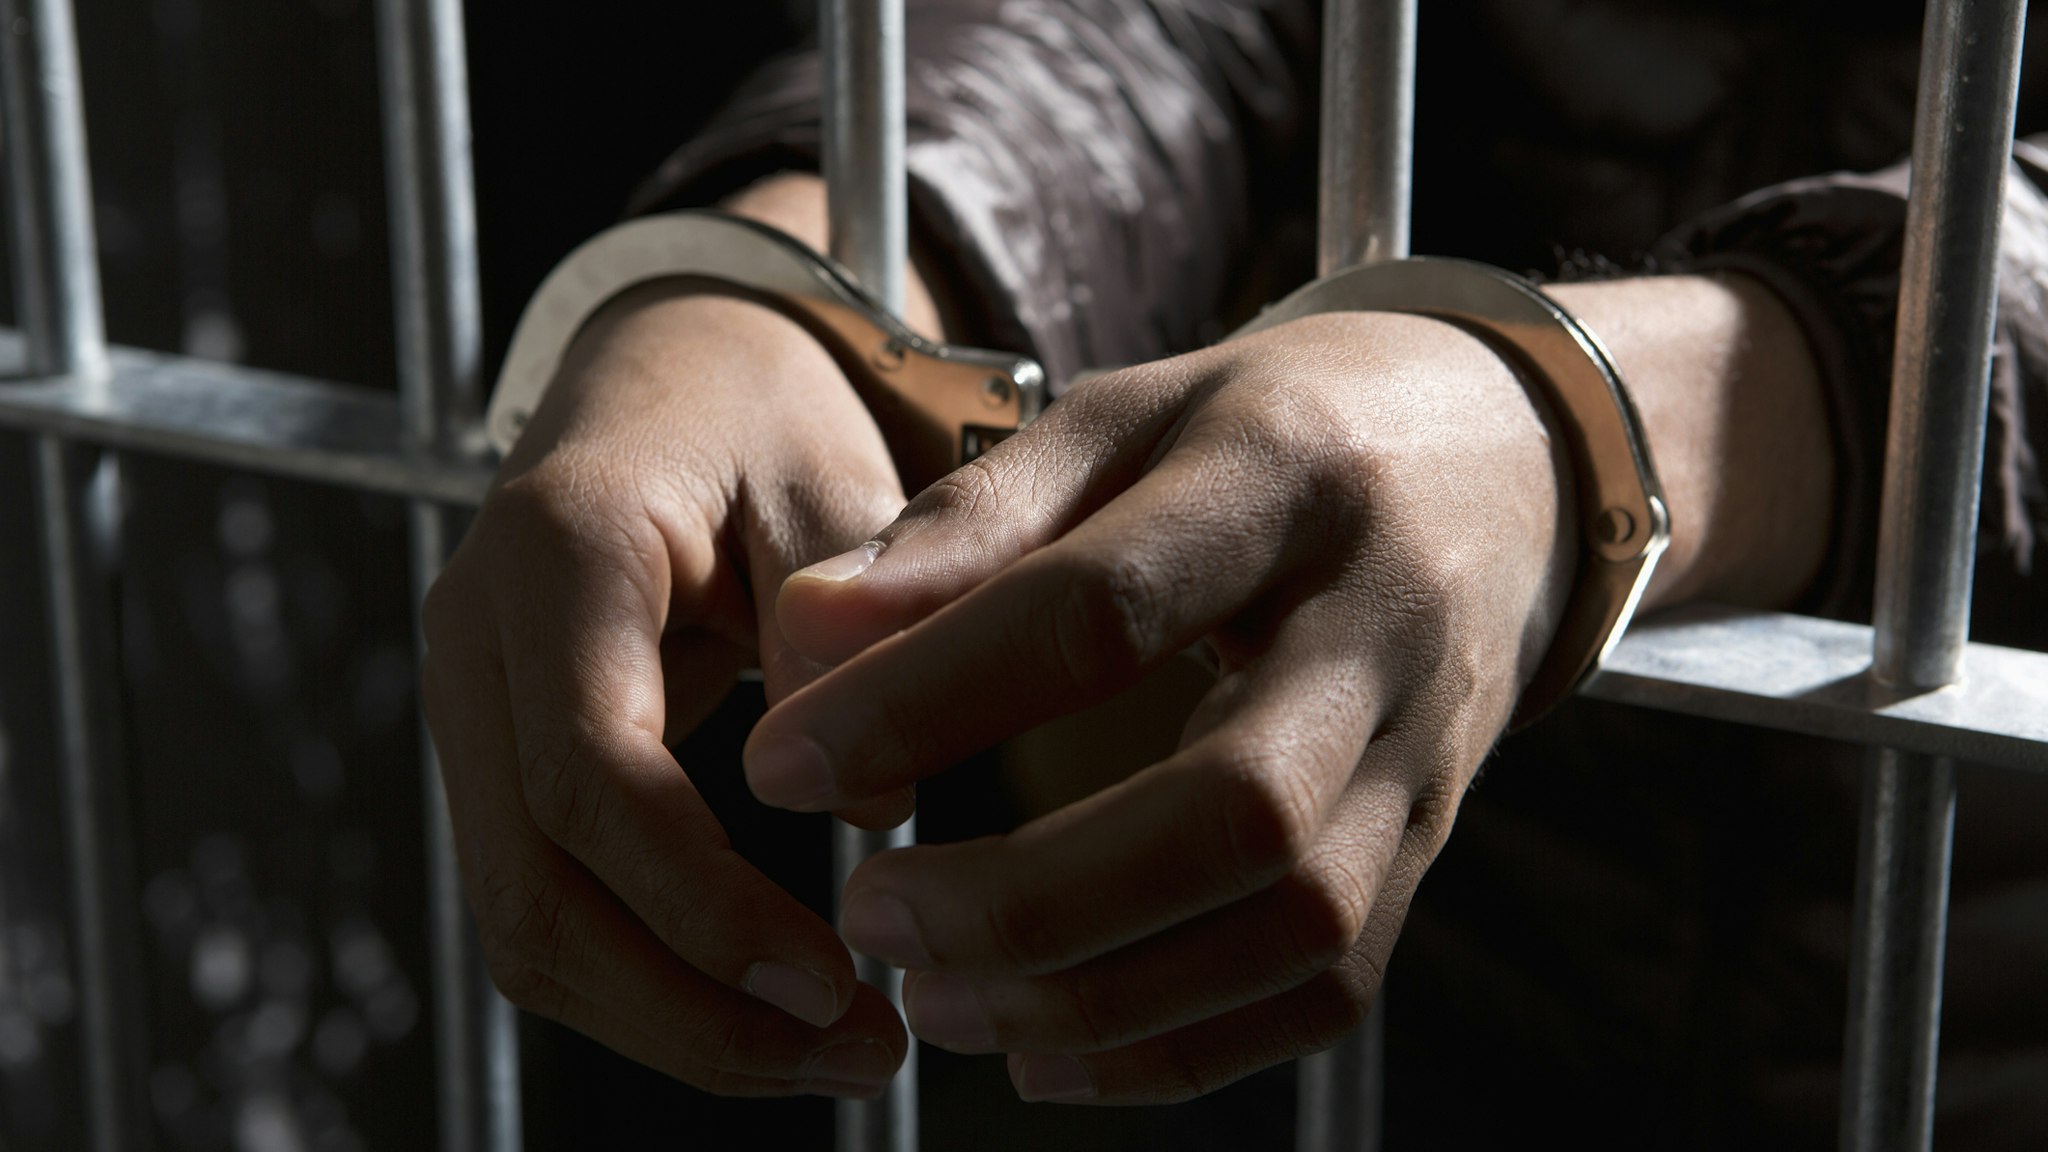 A prisoner behind bars with hands cuffed - stock photo